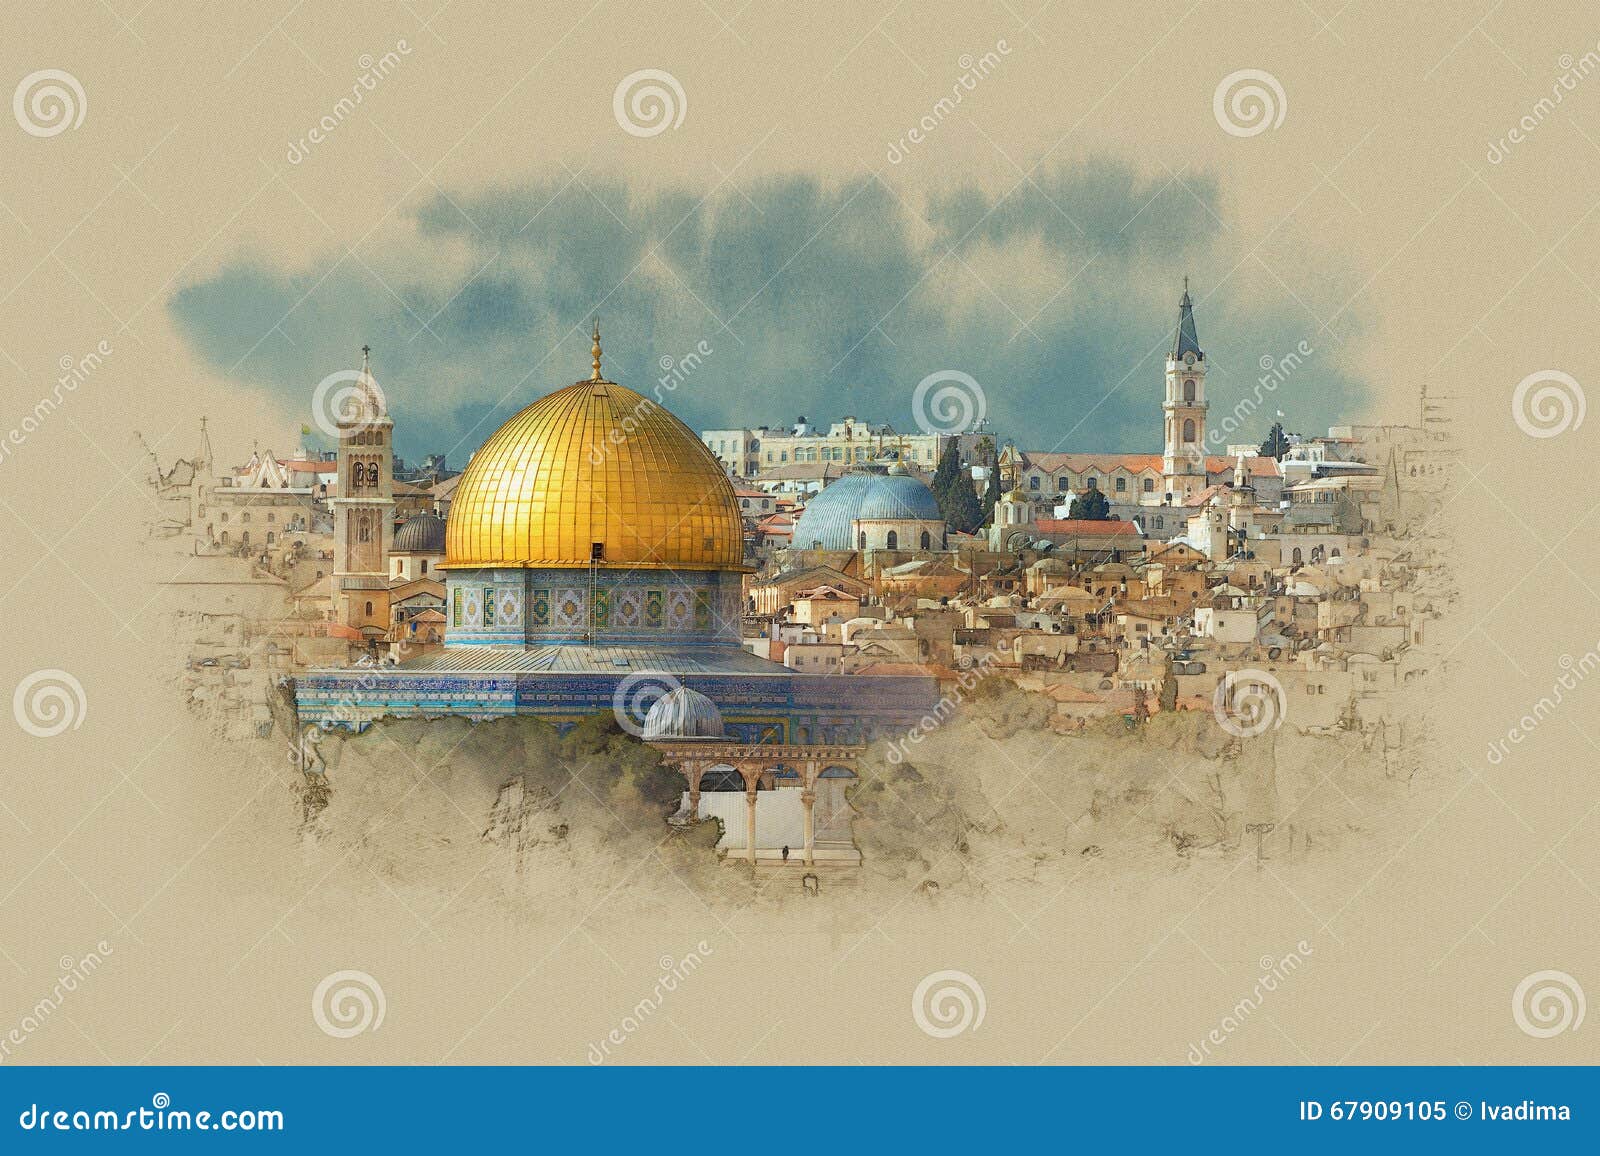 israel, the dome of the rock in jerusalem